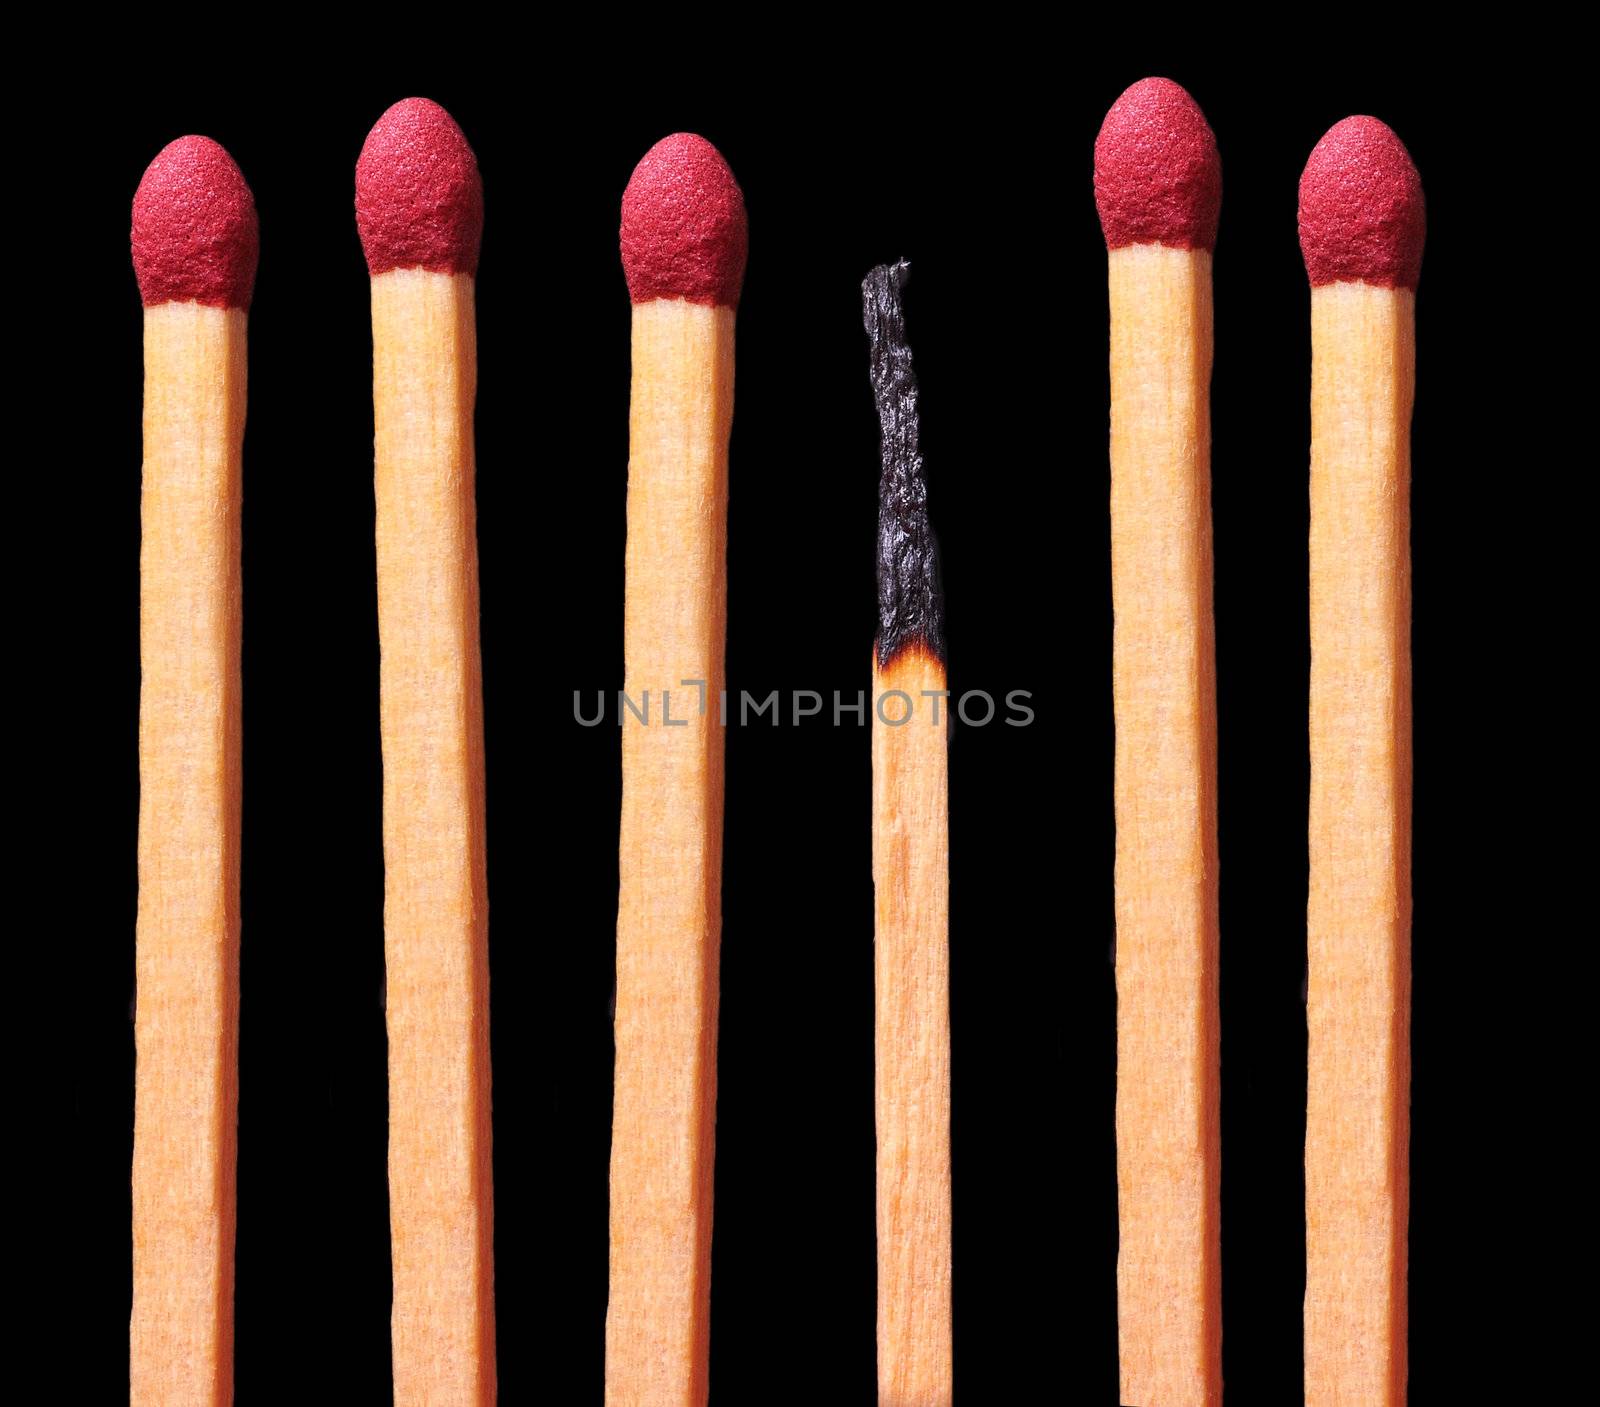 Group of matches with a burned one in the middle